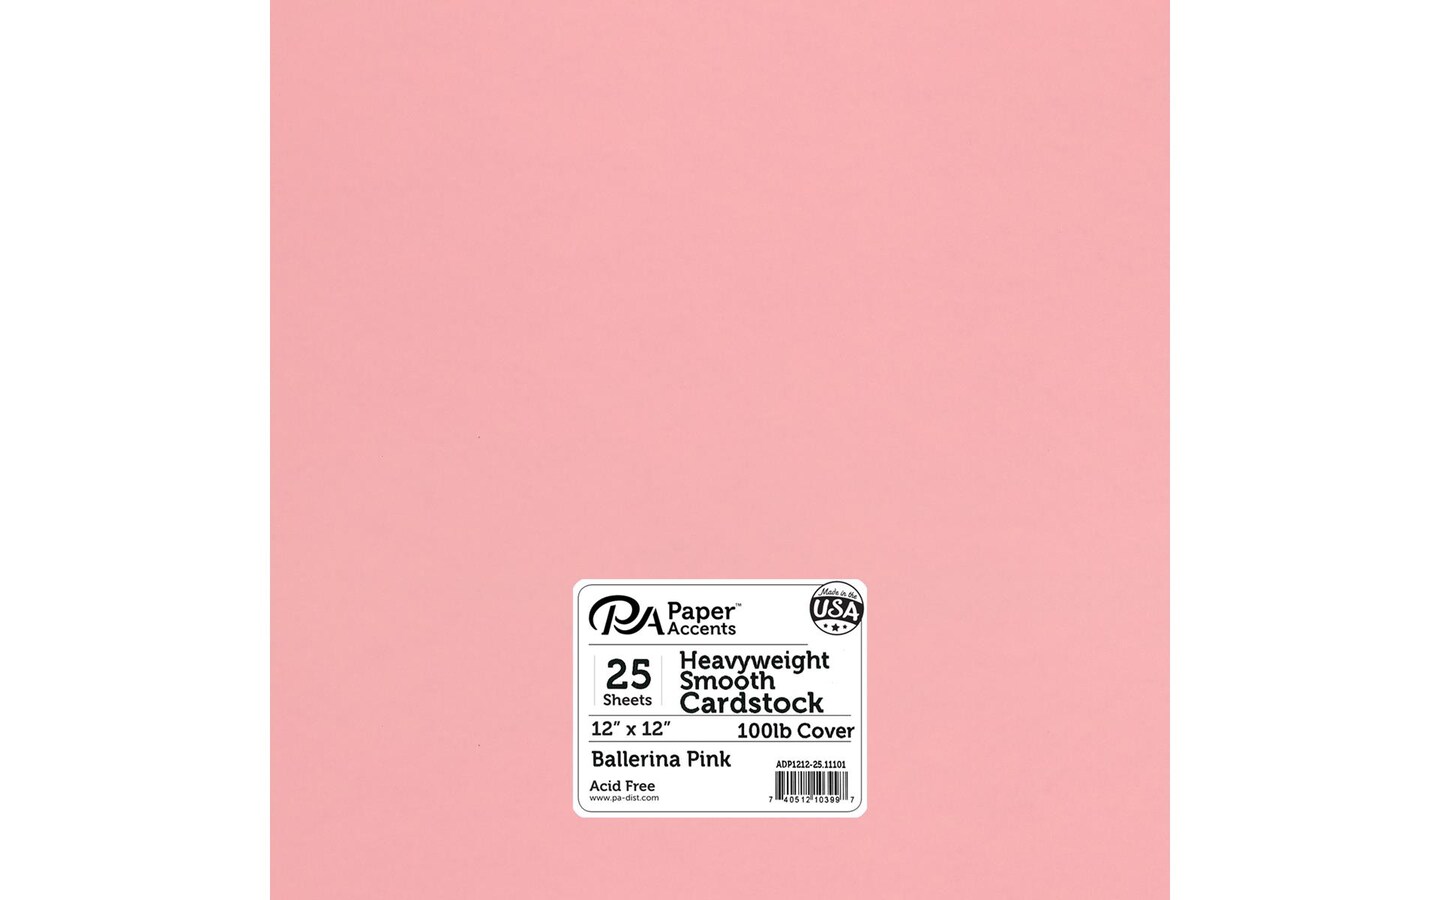 PA Paper Accents Heavyweight Smooth Cardstock 12 x 12 Ballerina Pink,  100lb colored cardstock paper for card making, scrapbooking, printing,  quilling and crafts, 25 piece pack